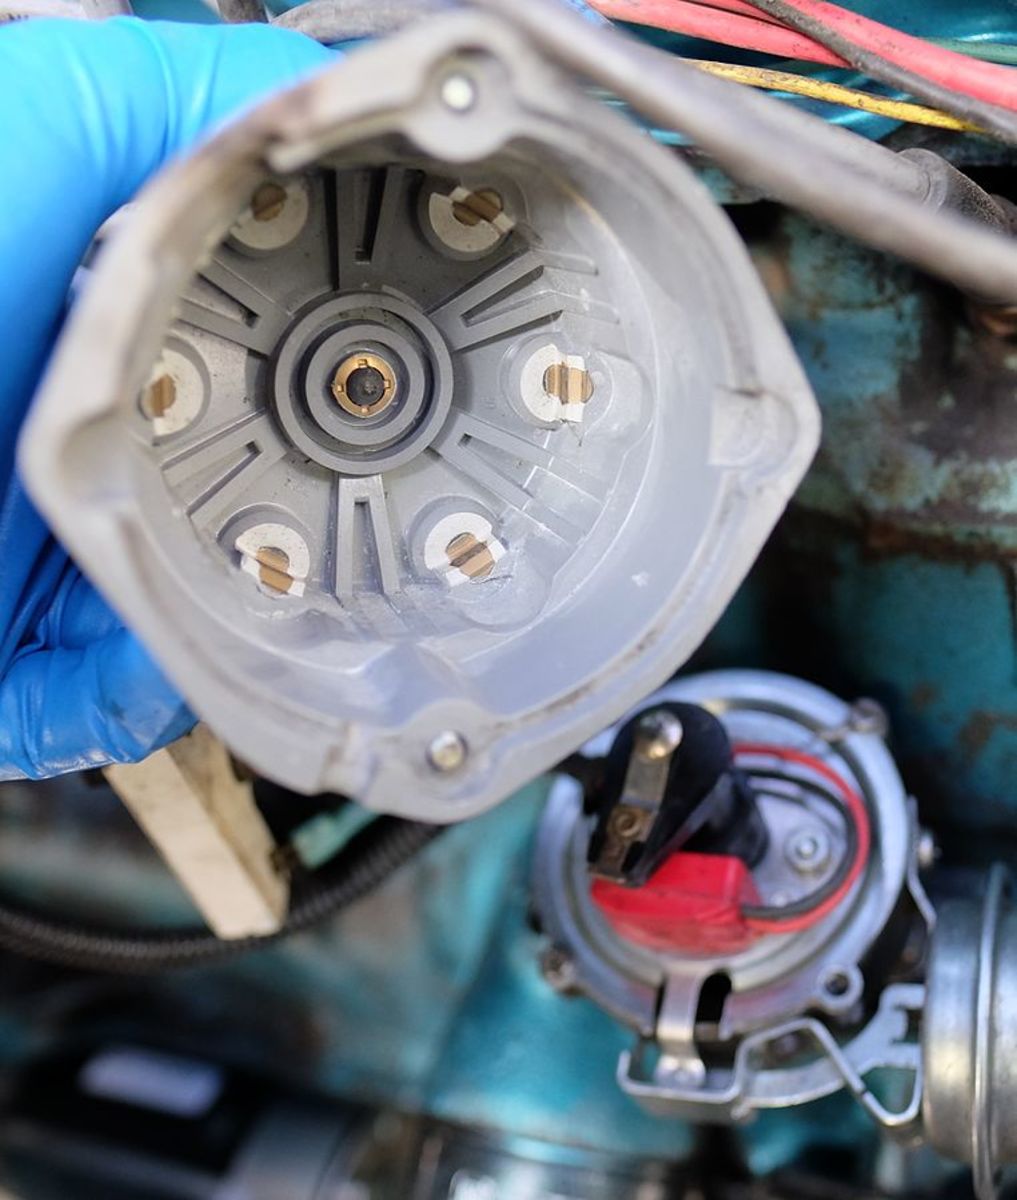 Check ignition system components that may be causing trouble like distributor cap and rotor.